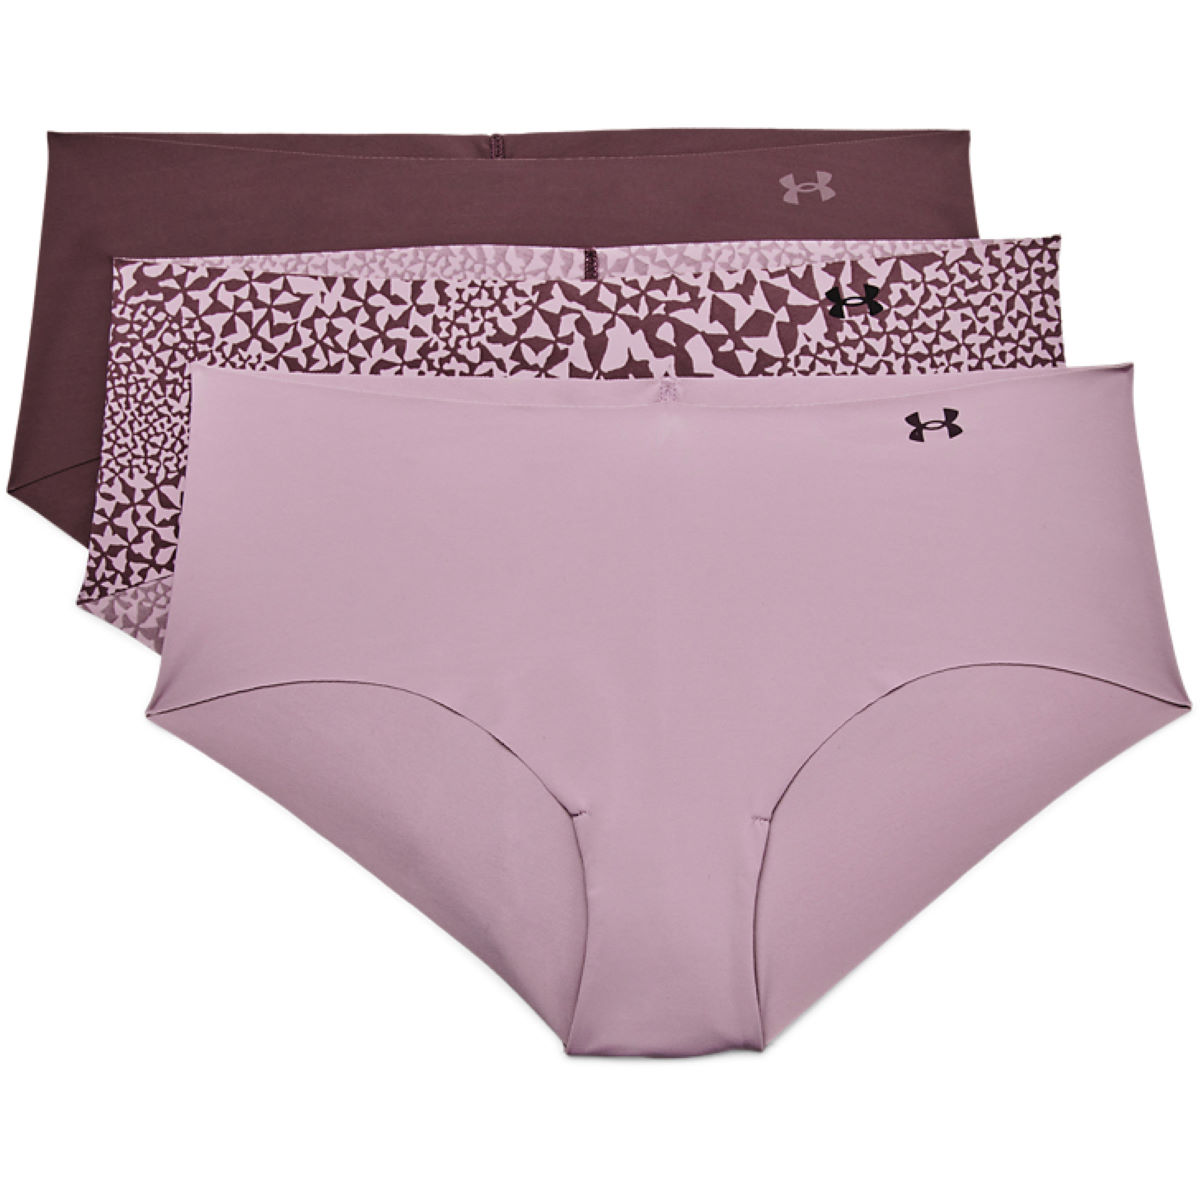 Bragas Under Armour PS Hipster Print para mujer (Lote de 3) - Ropa interior